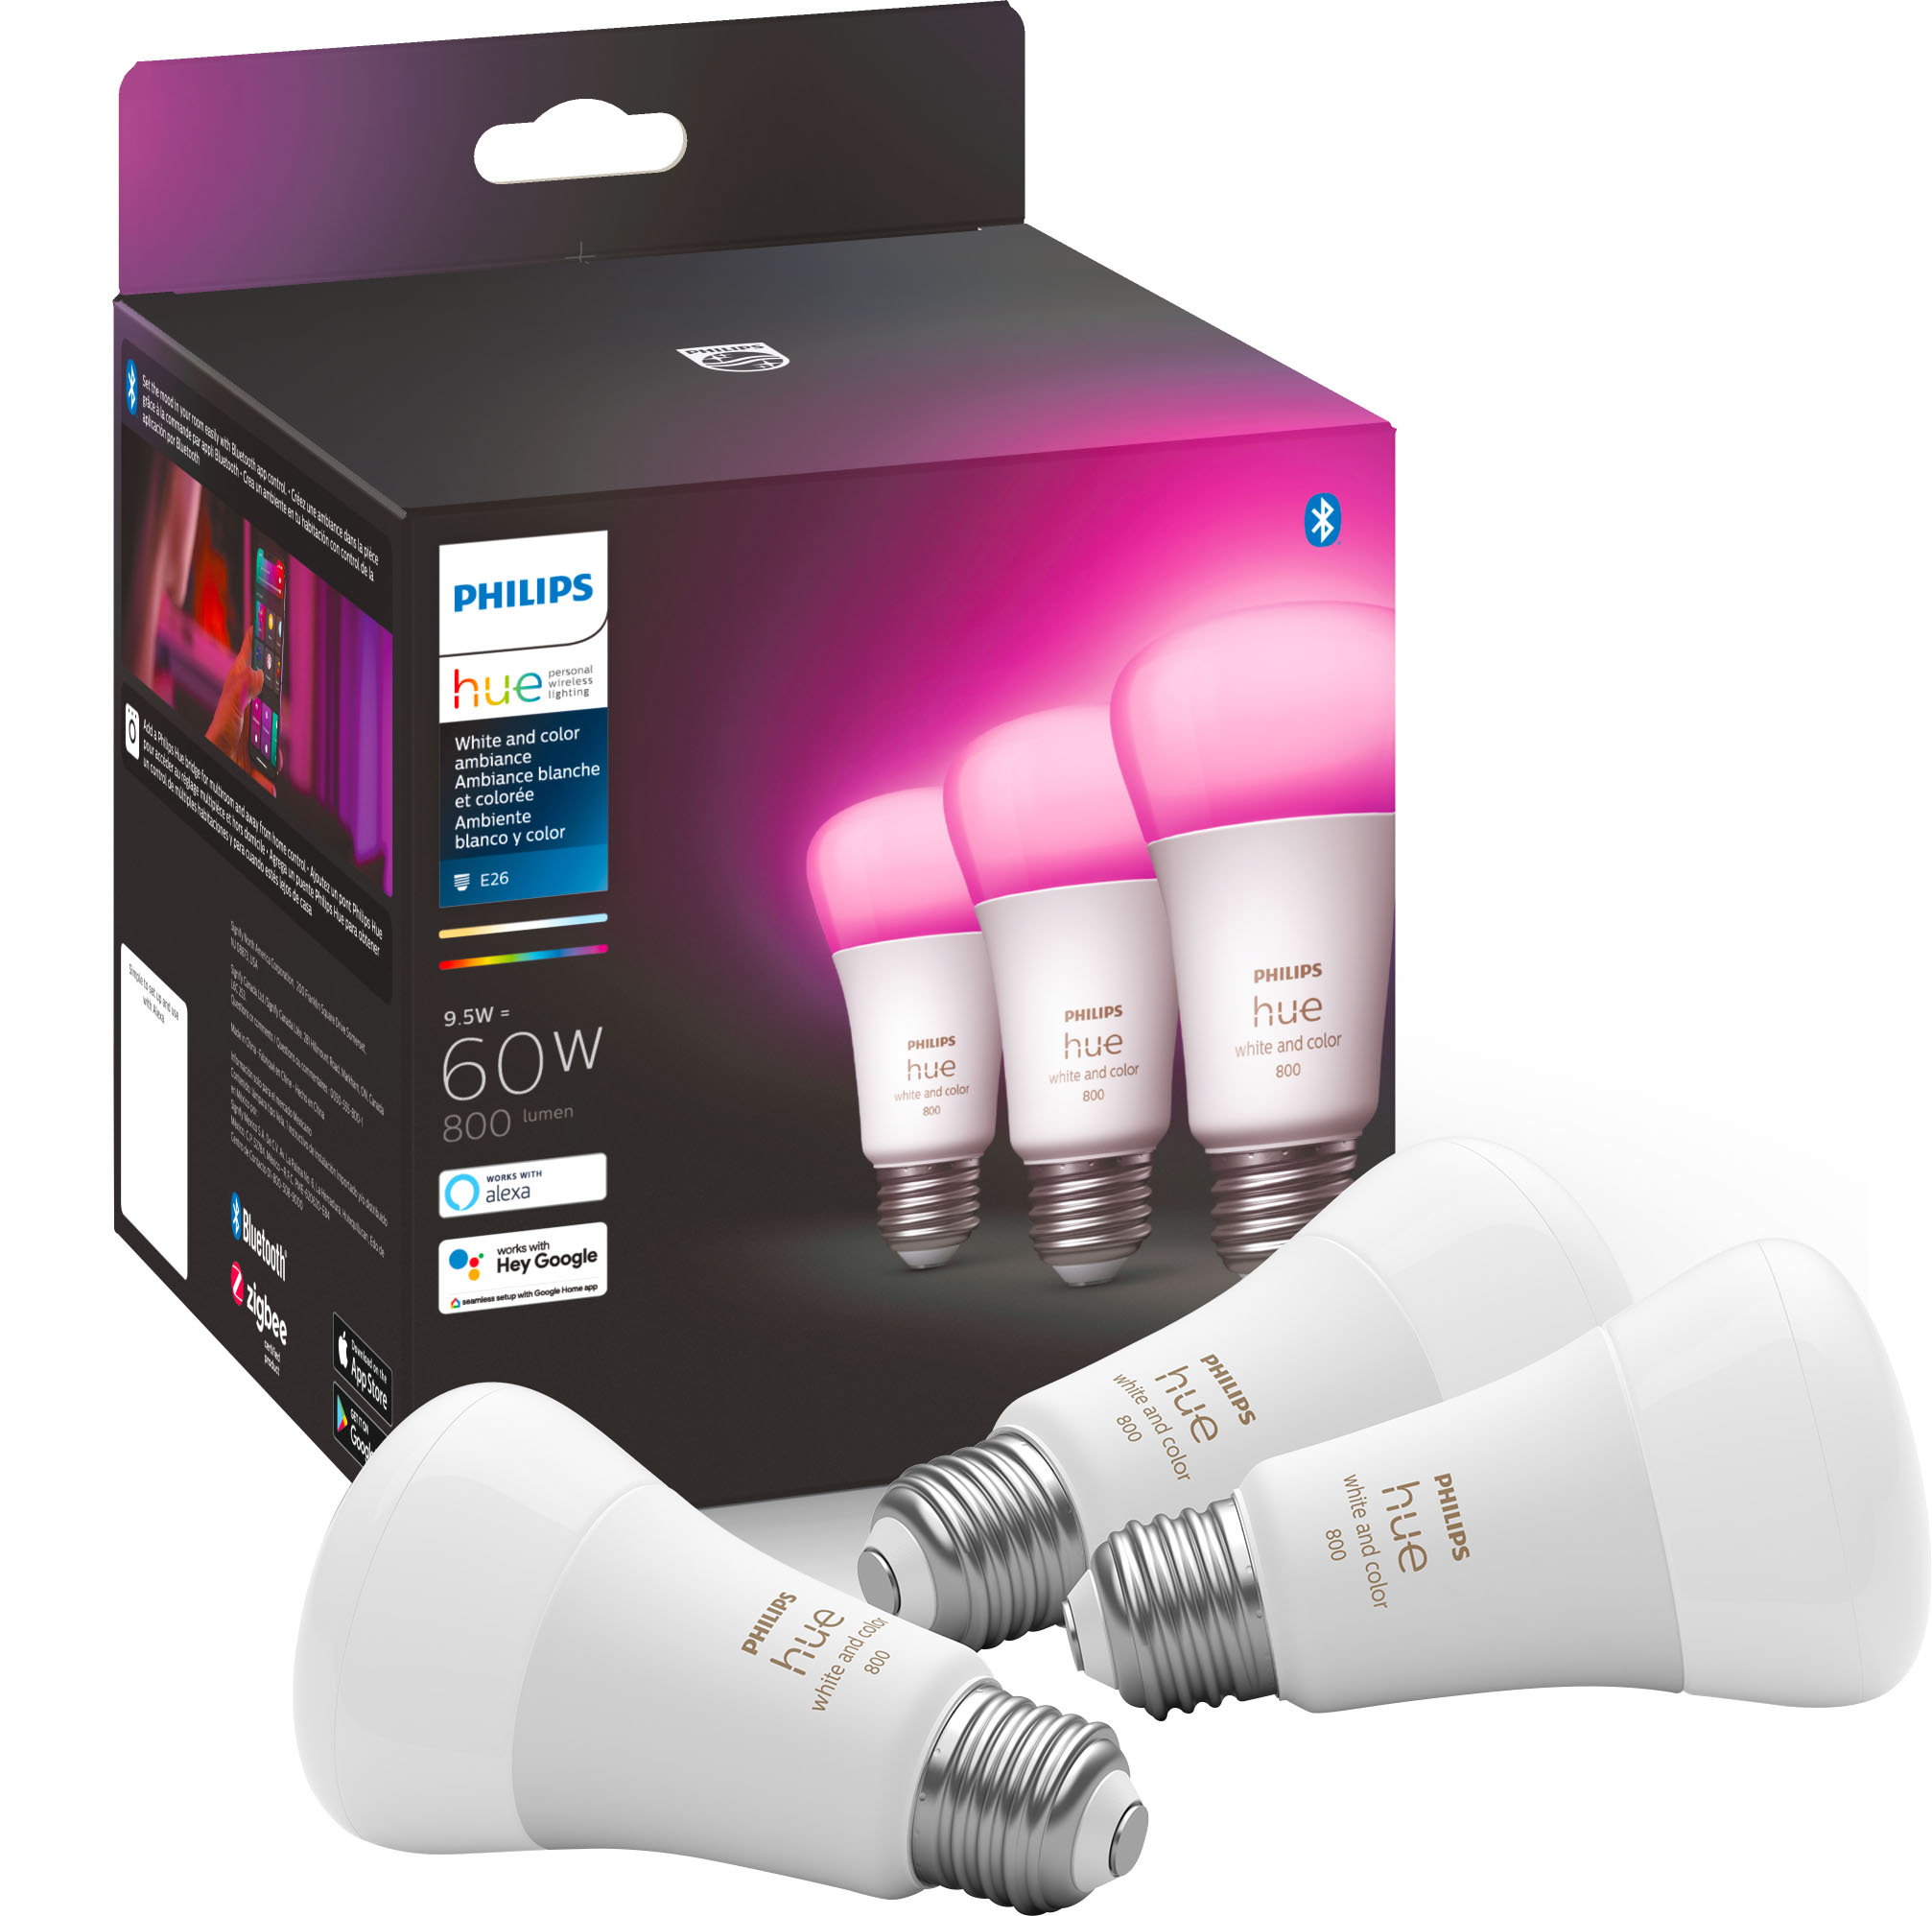 with Bluetooth Philips Hue White & Colour Ambiance Smart Bulb Twin Pack LED E27 Edison Screw B22 Bayonet Cap with Bluetooth Compatible with Alexa & White and Colour Ambiance Single Smart Bulb LED